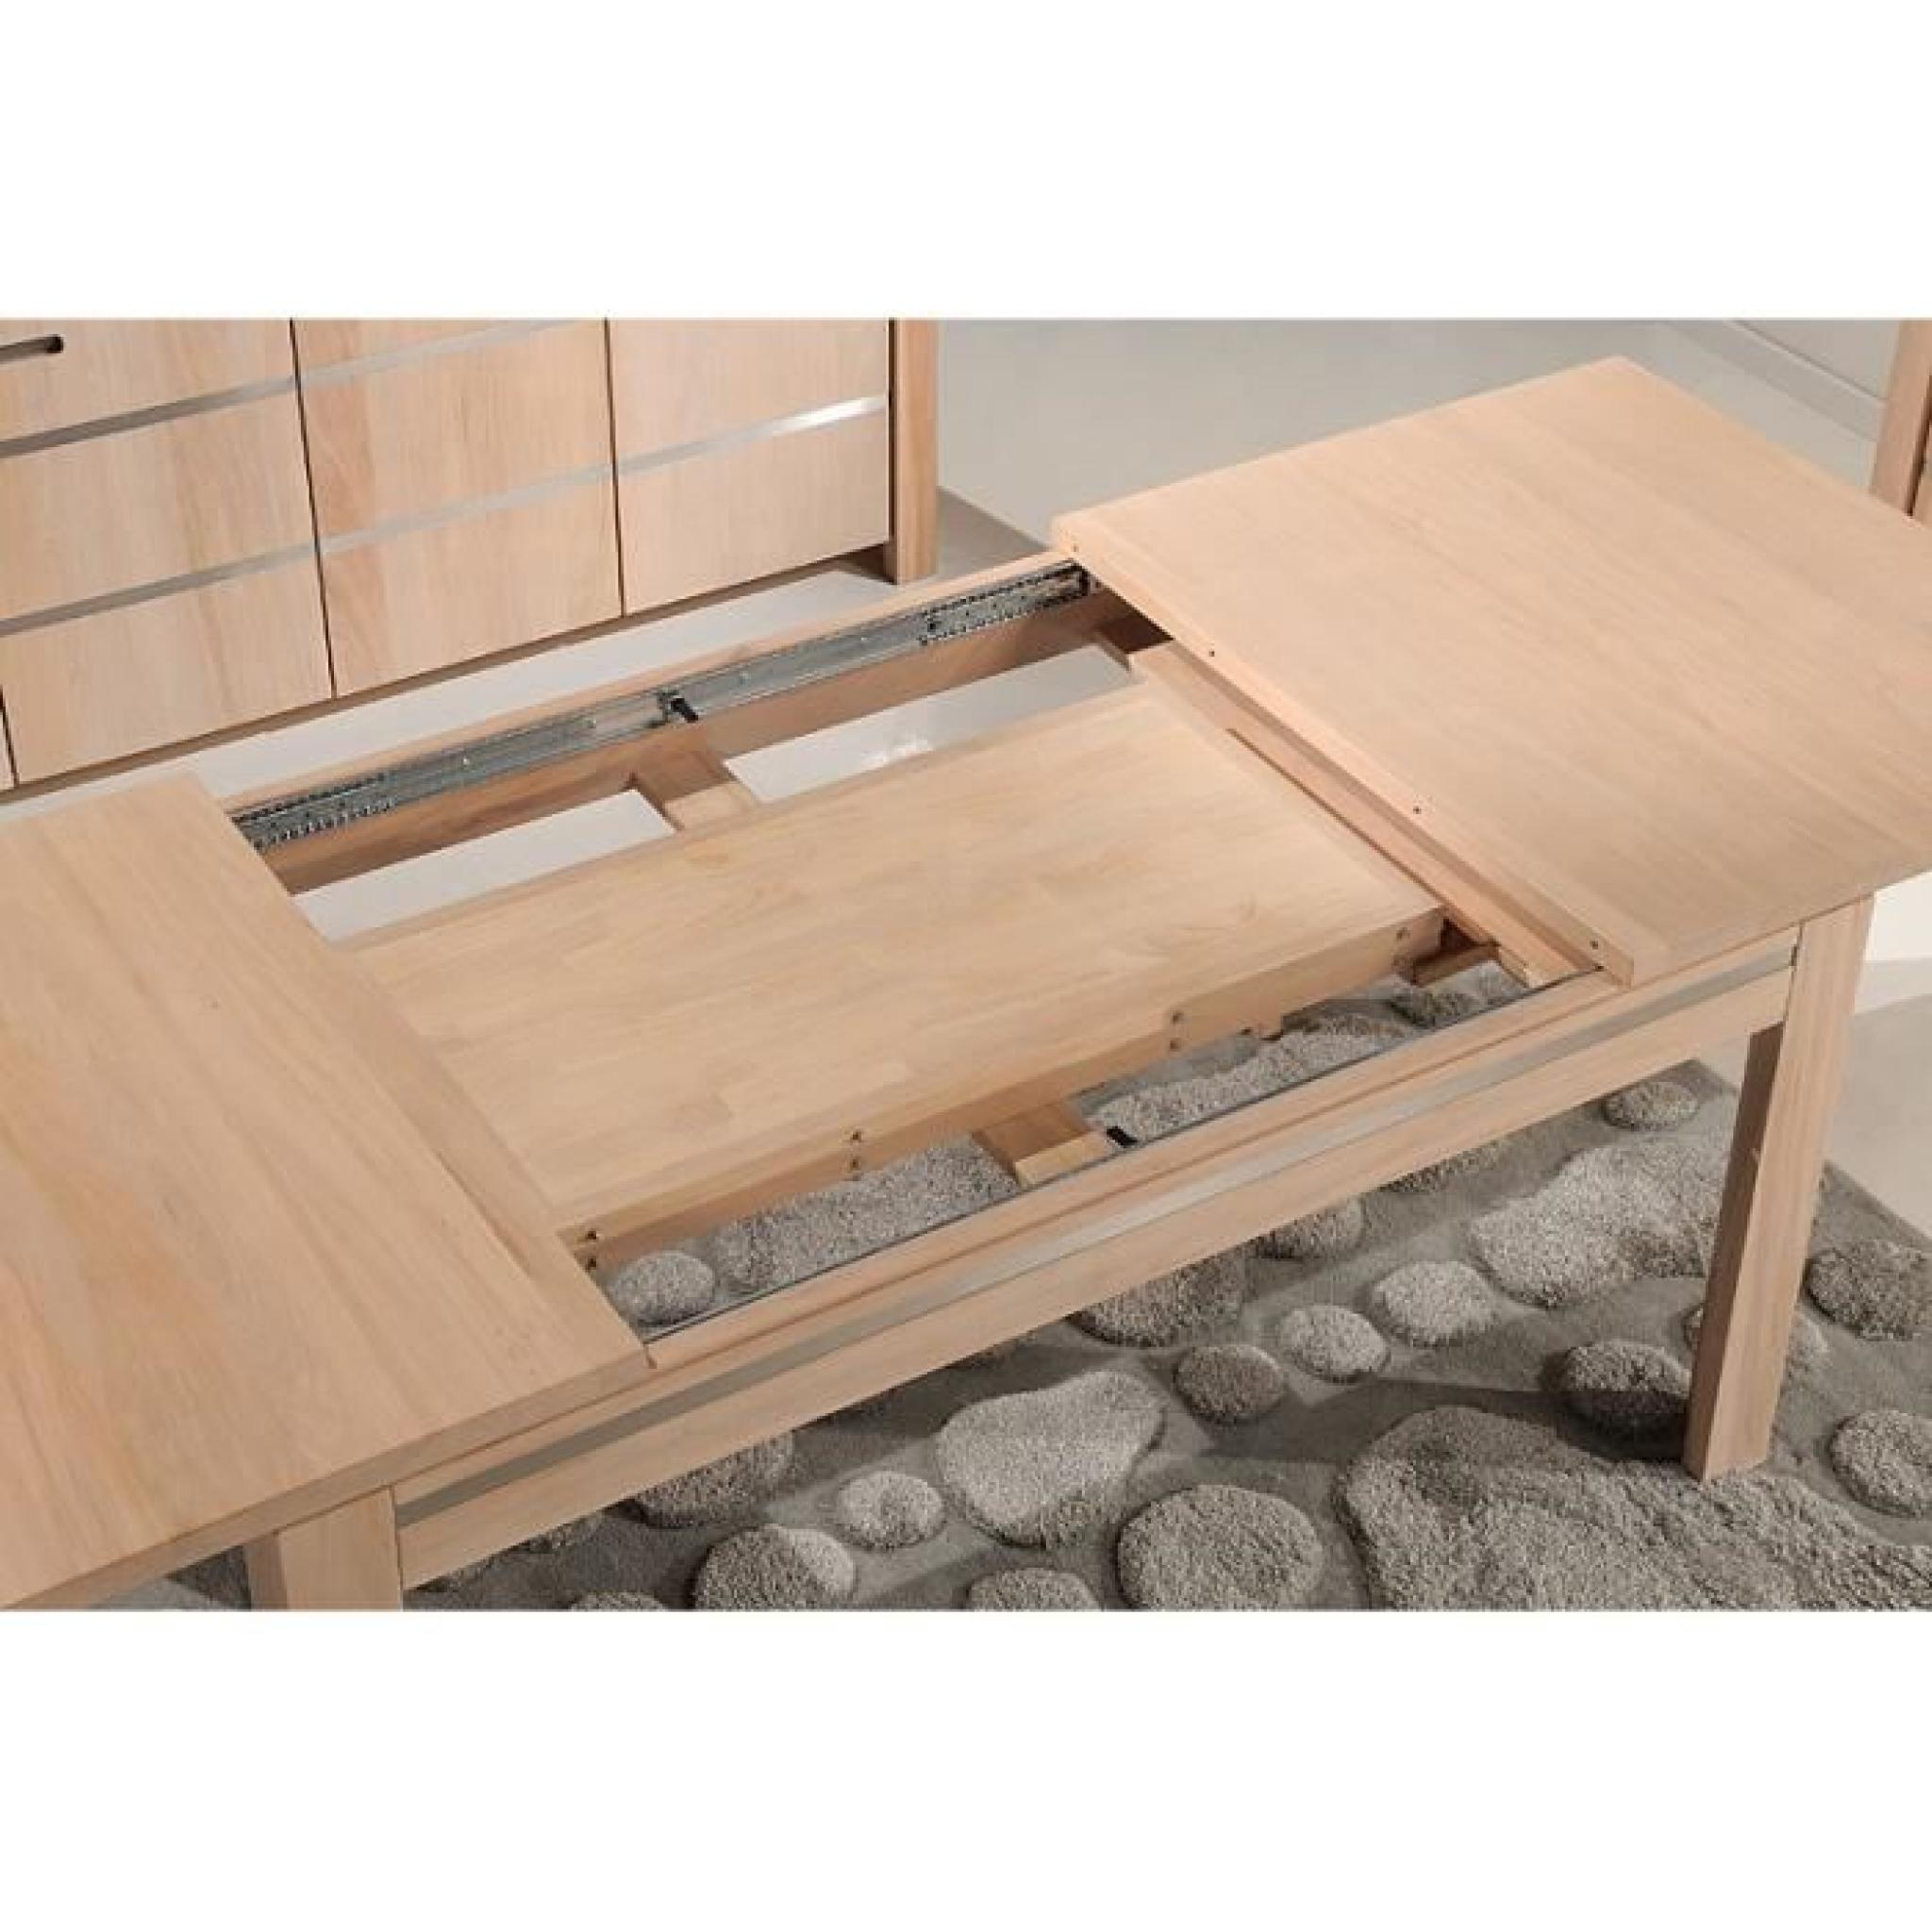 Table OPALE 180/95 ORME MASSIF-INOX (Orme - Wengé) pas cher